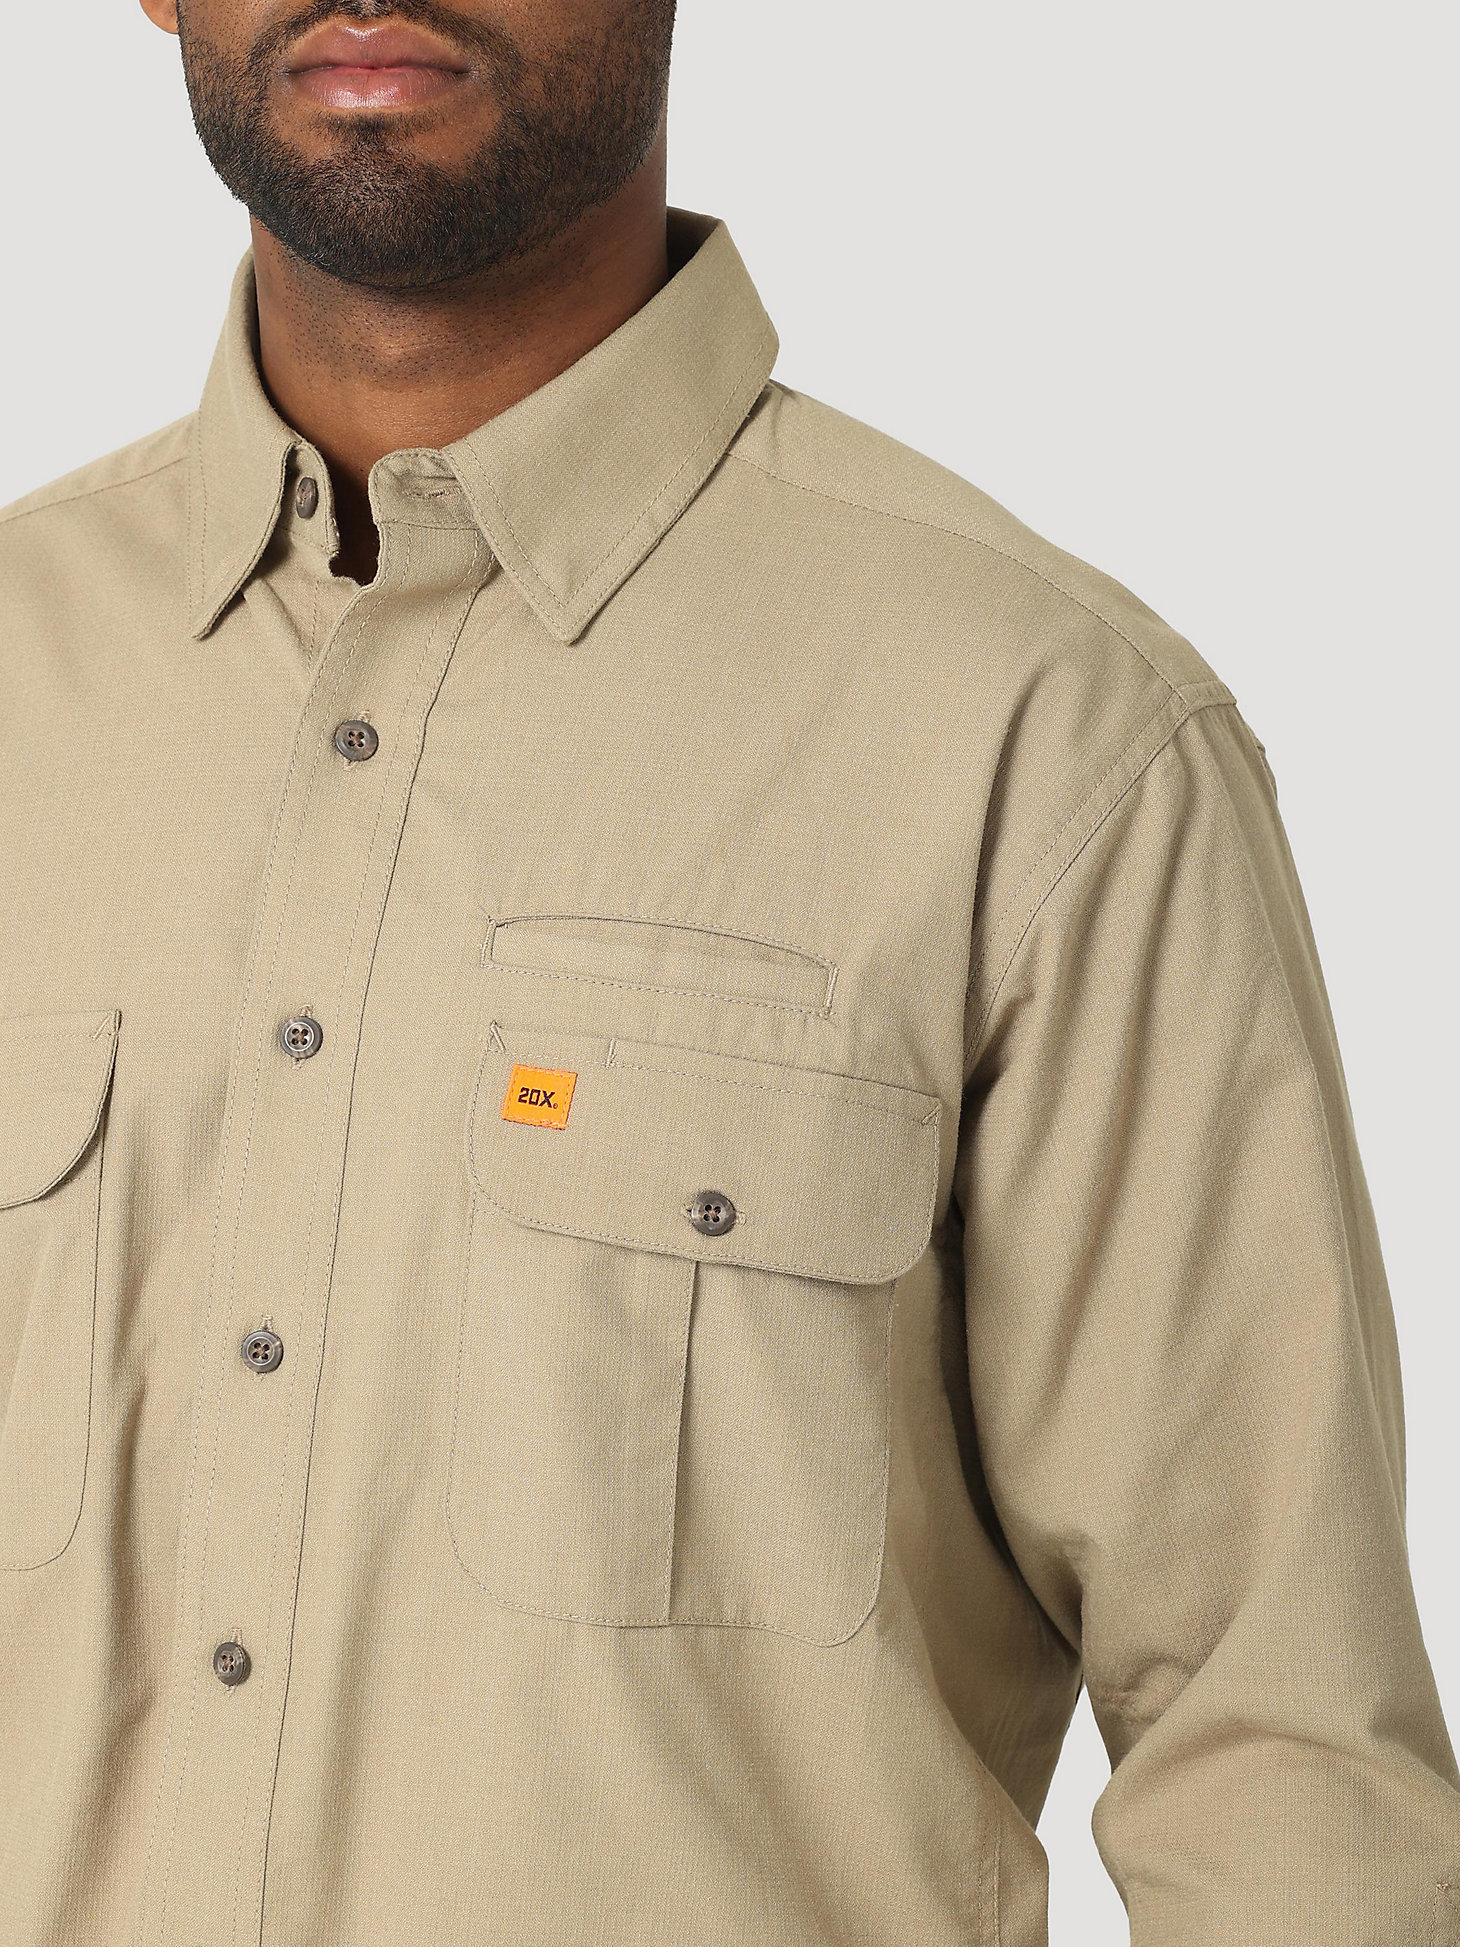 FR Flame Resistant 20X Long Sleeve Vented Work Shirt in Khaki alternative view 2